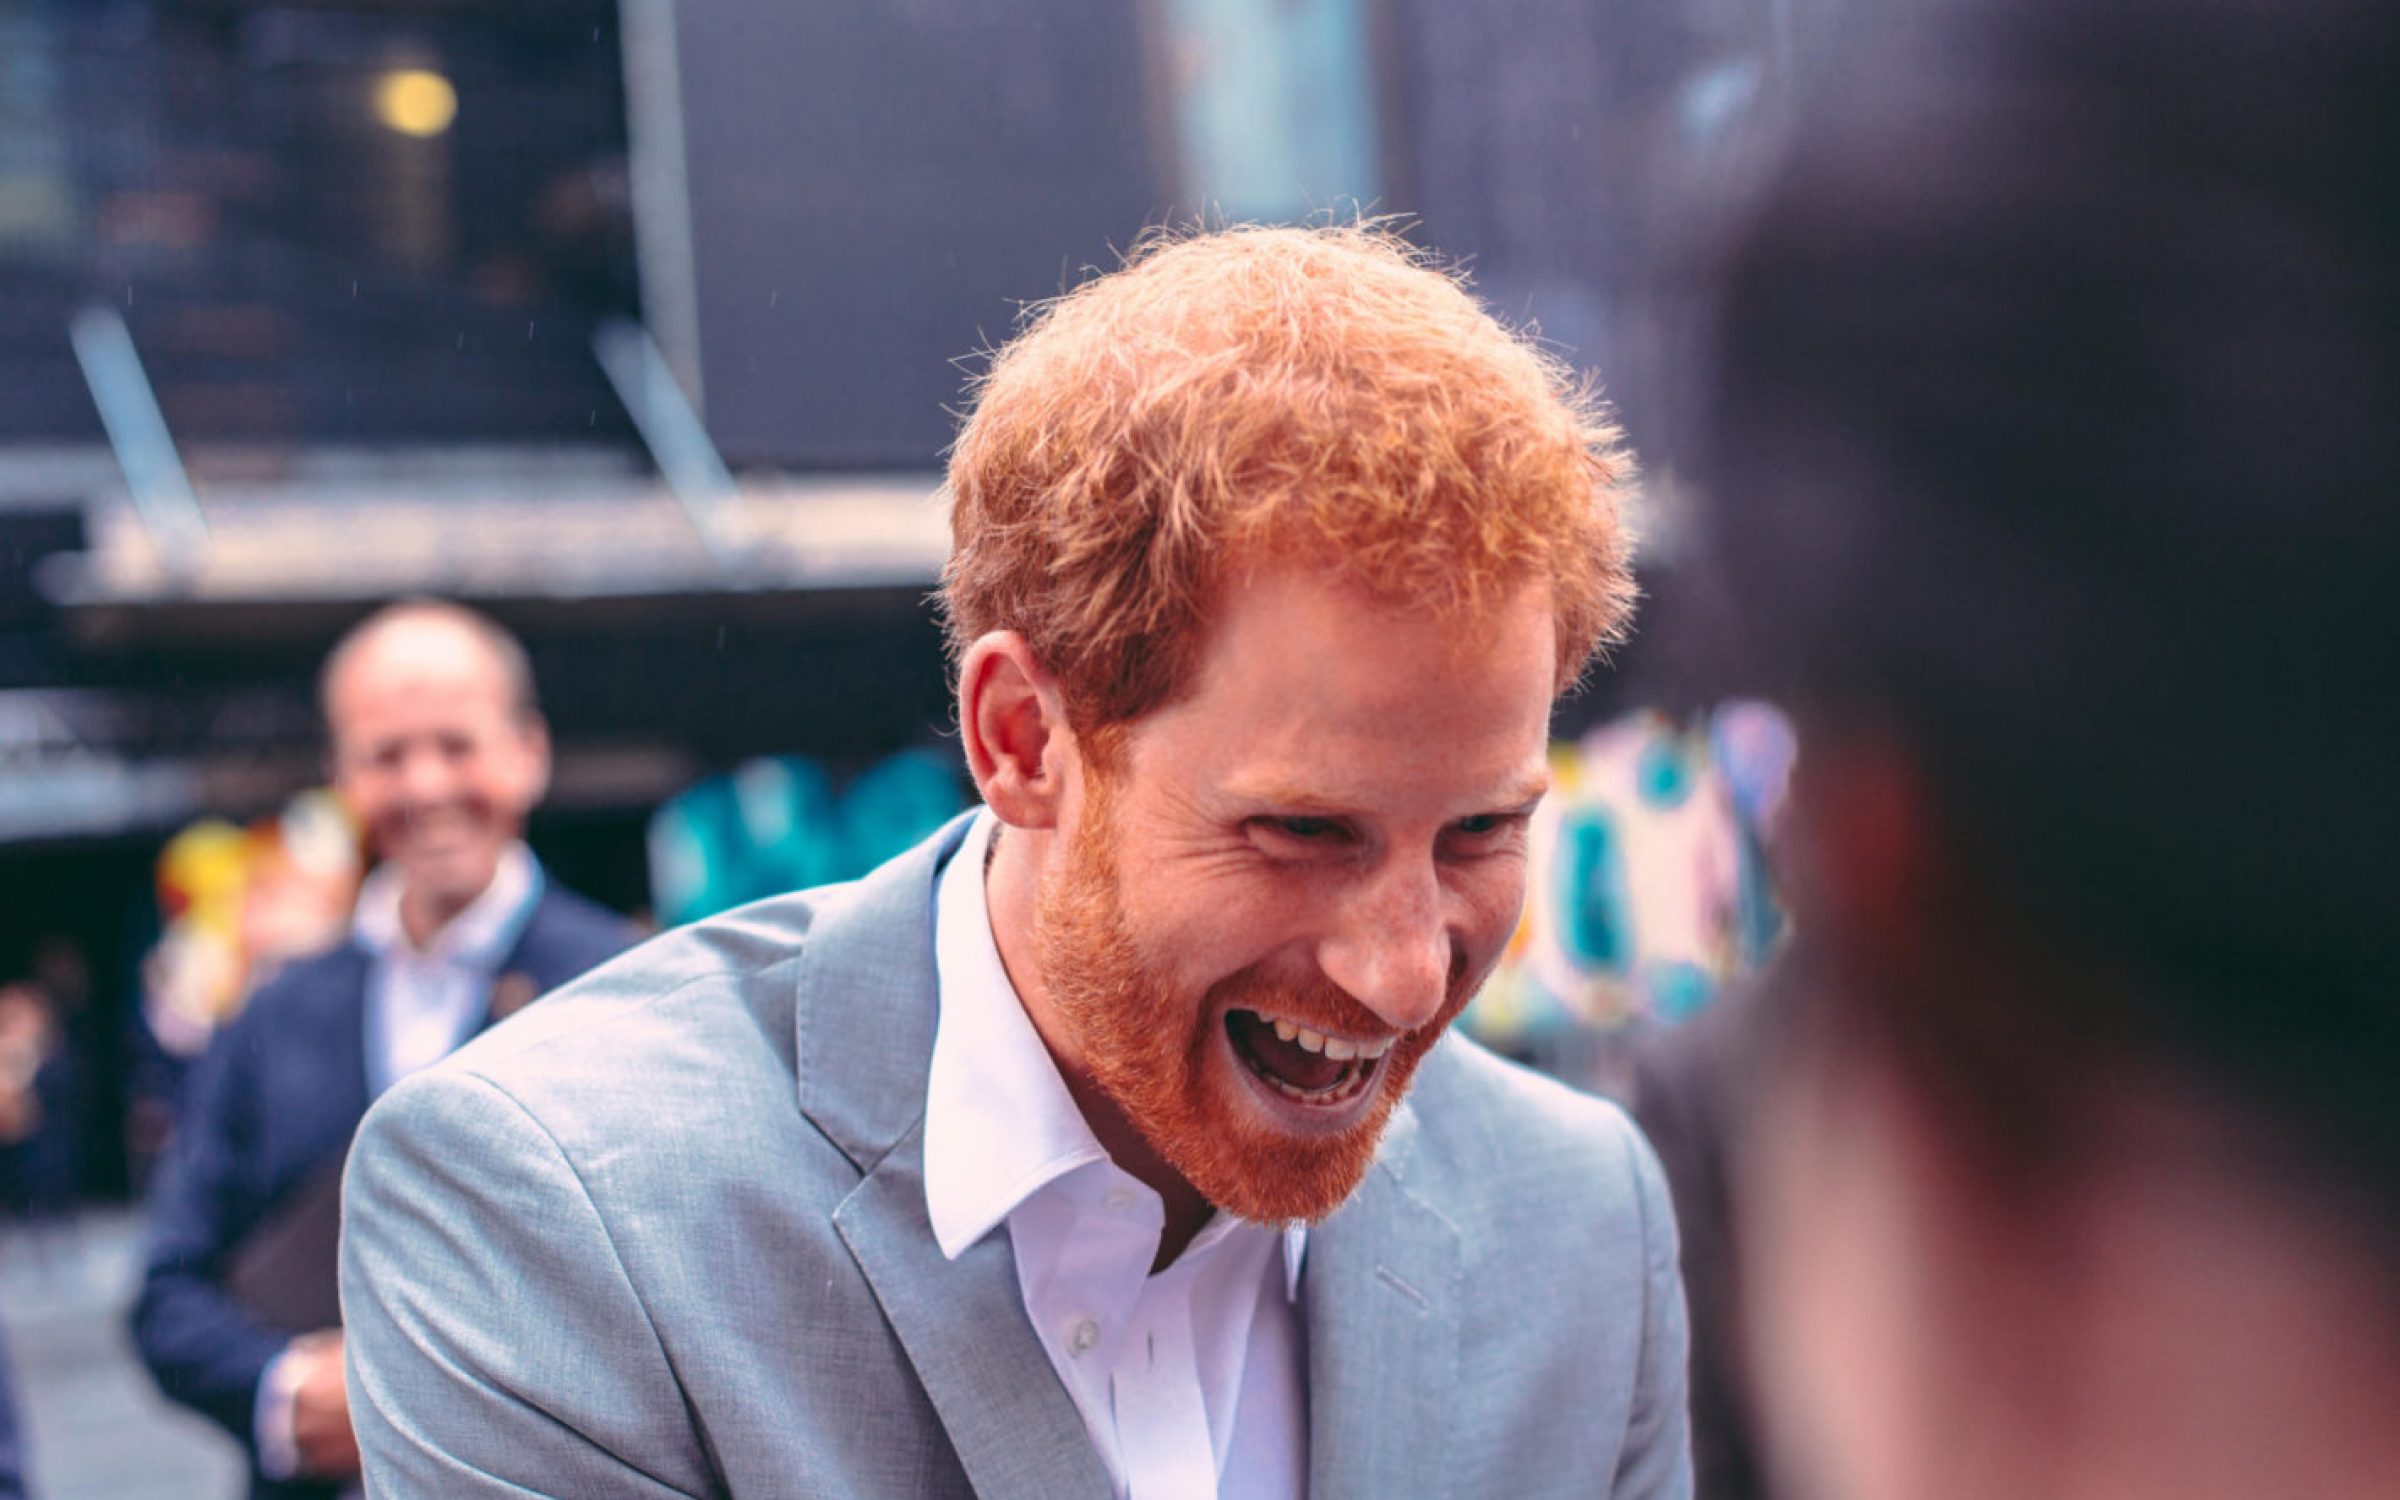 Belfast, Northern Ireland - September Thursday 2017: Prince Harry - Duke of Sussex visits Belfast, pictured here leaving The MAC.